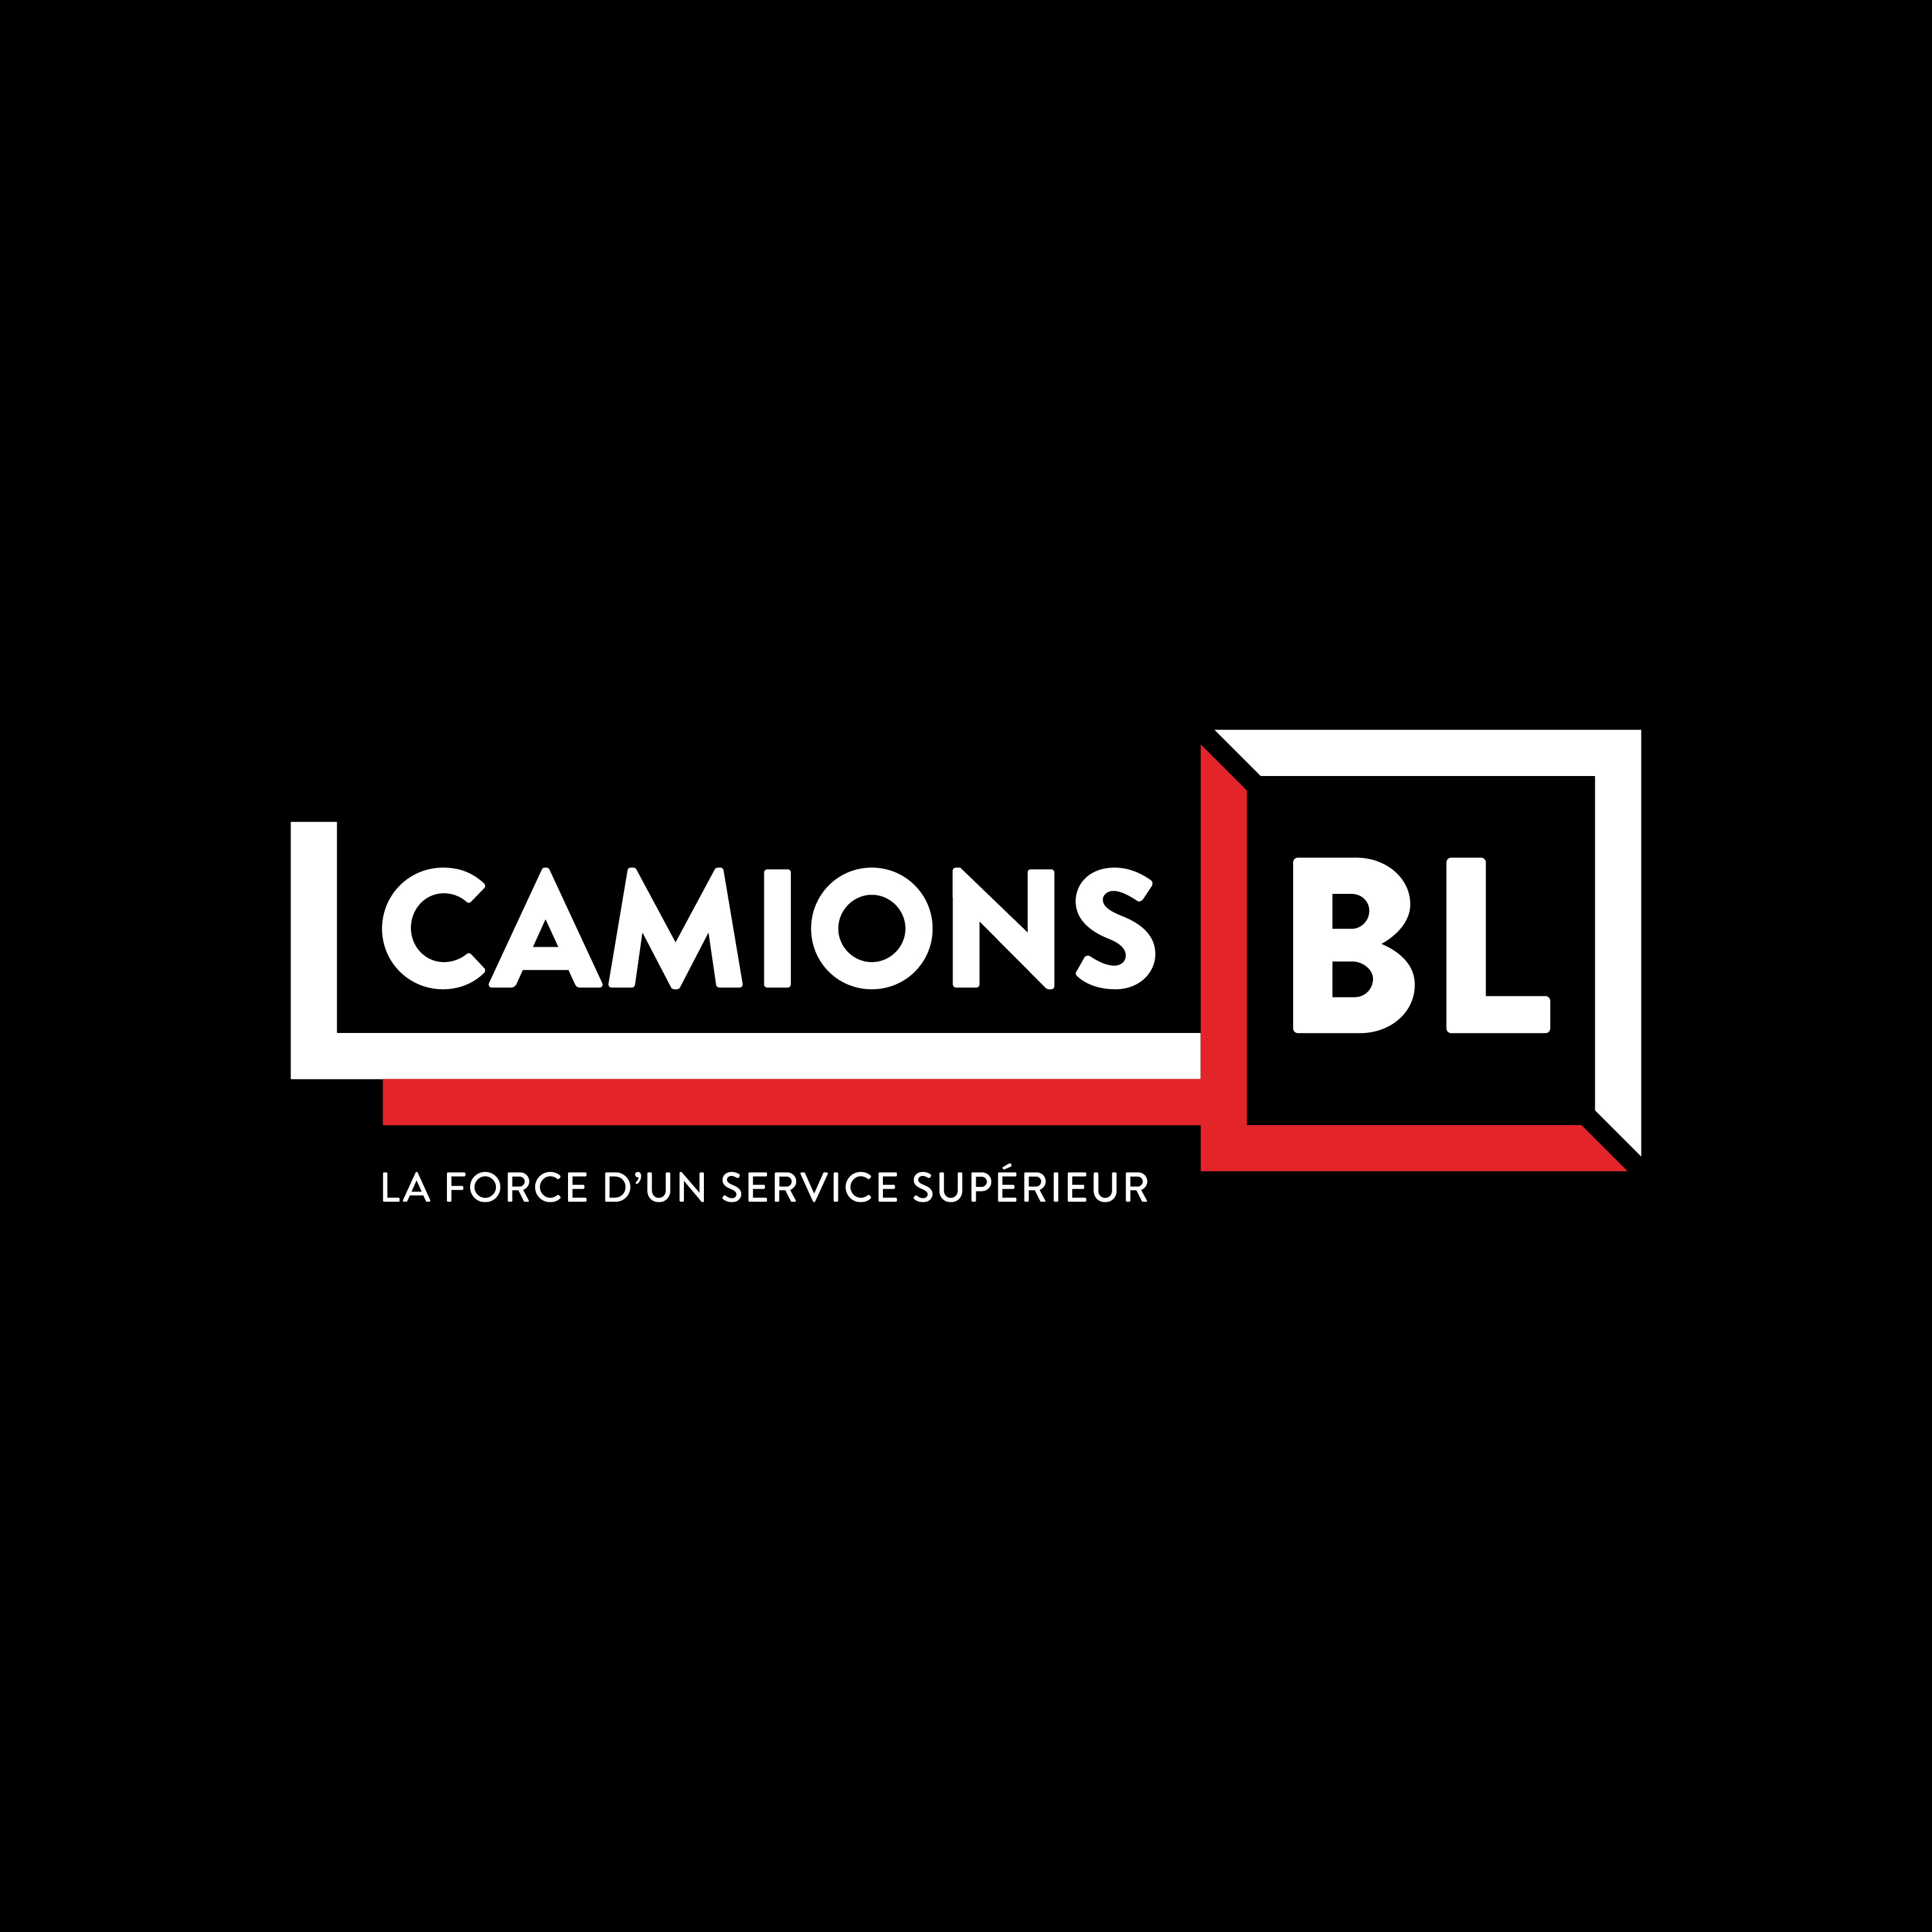 Camions BL